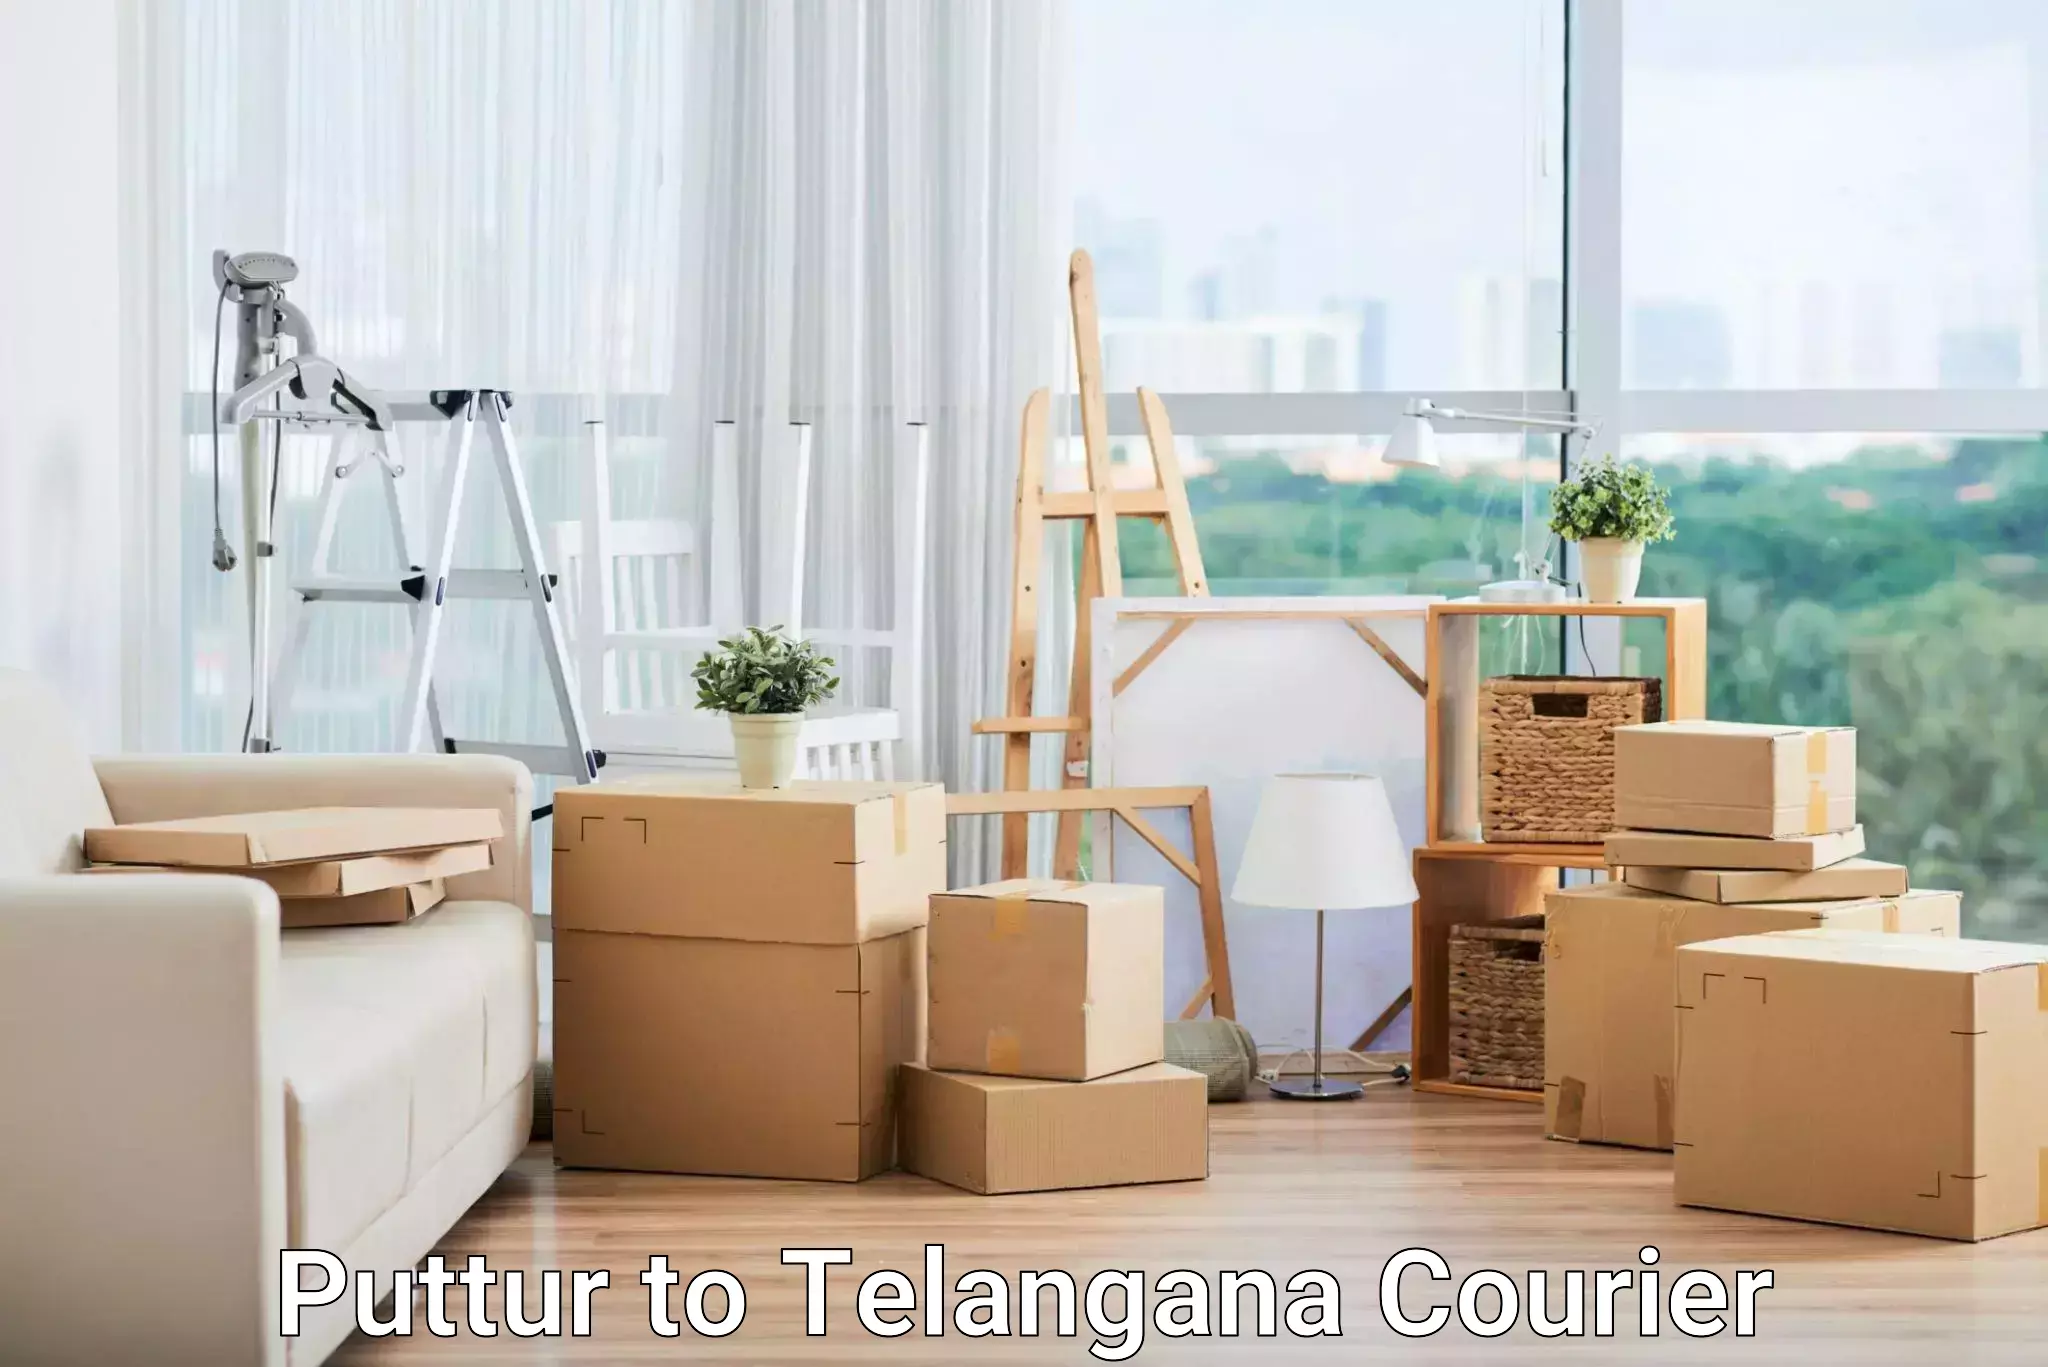 Quick courier services in Puttur to Hyderabad